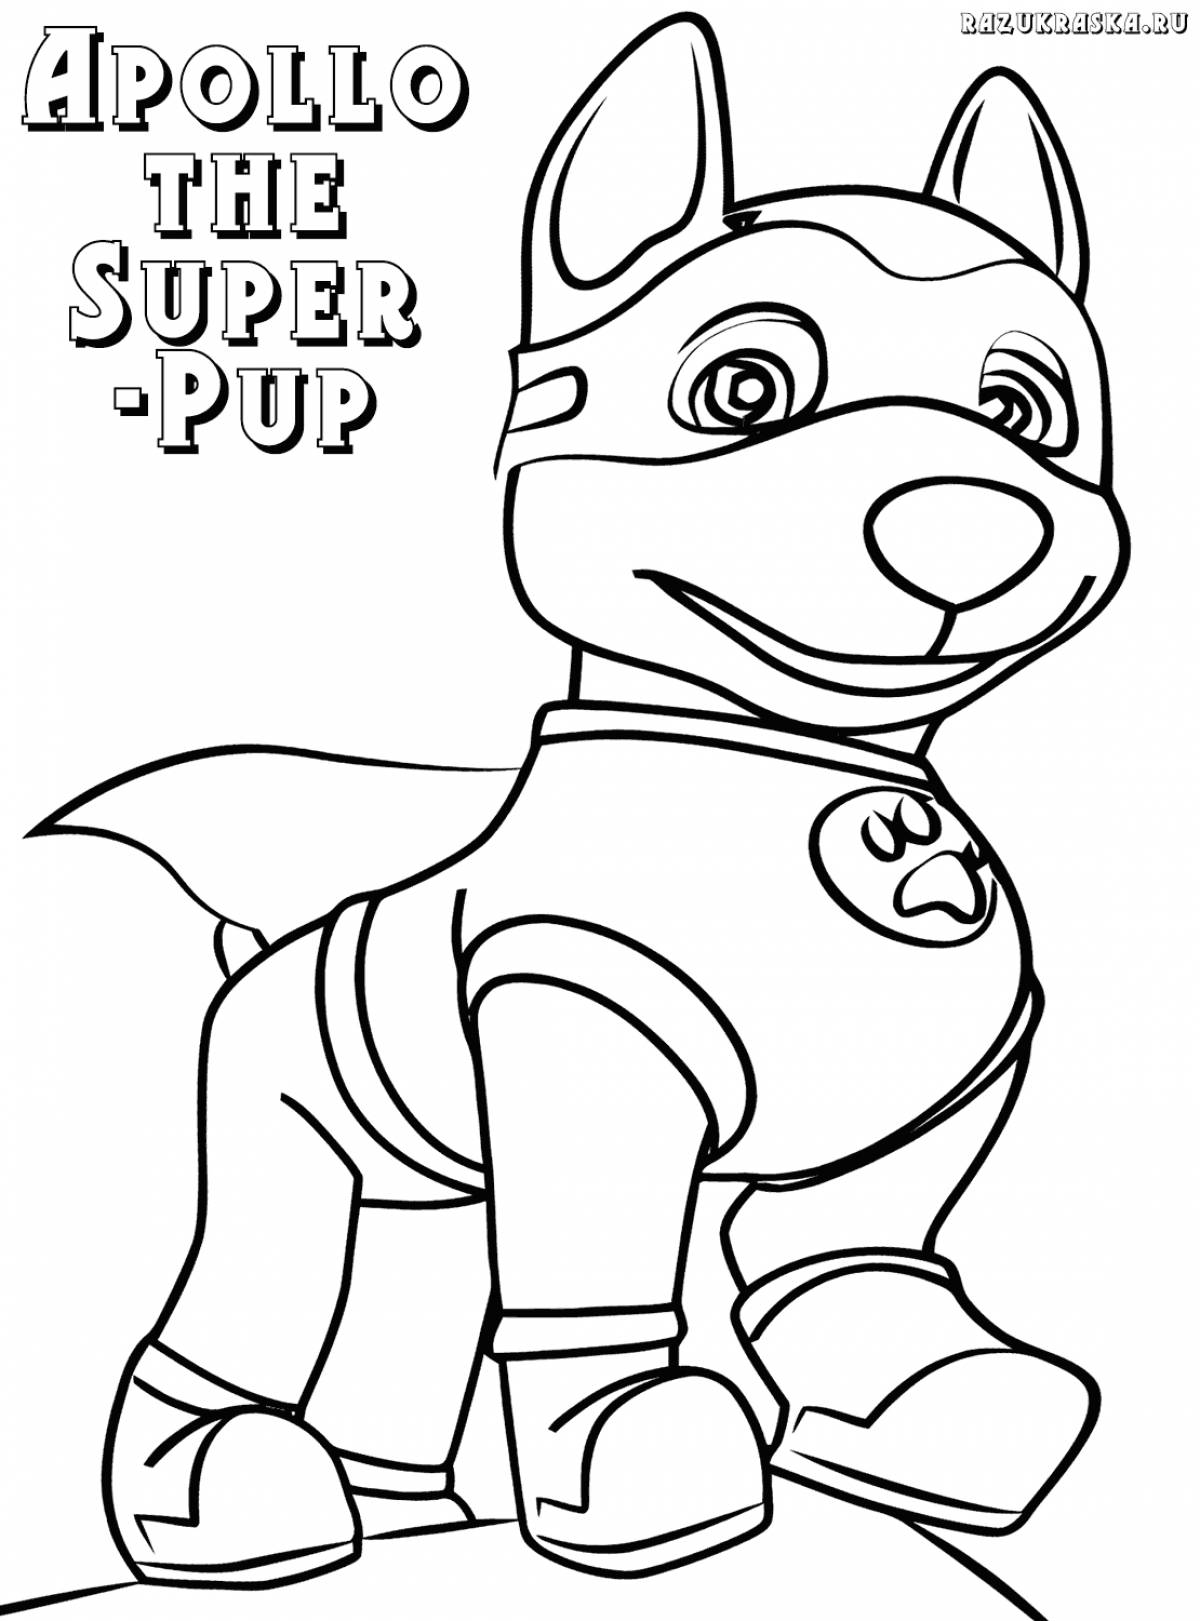 Funny turbo cat and super dog